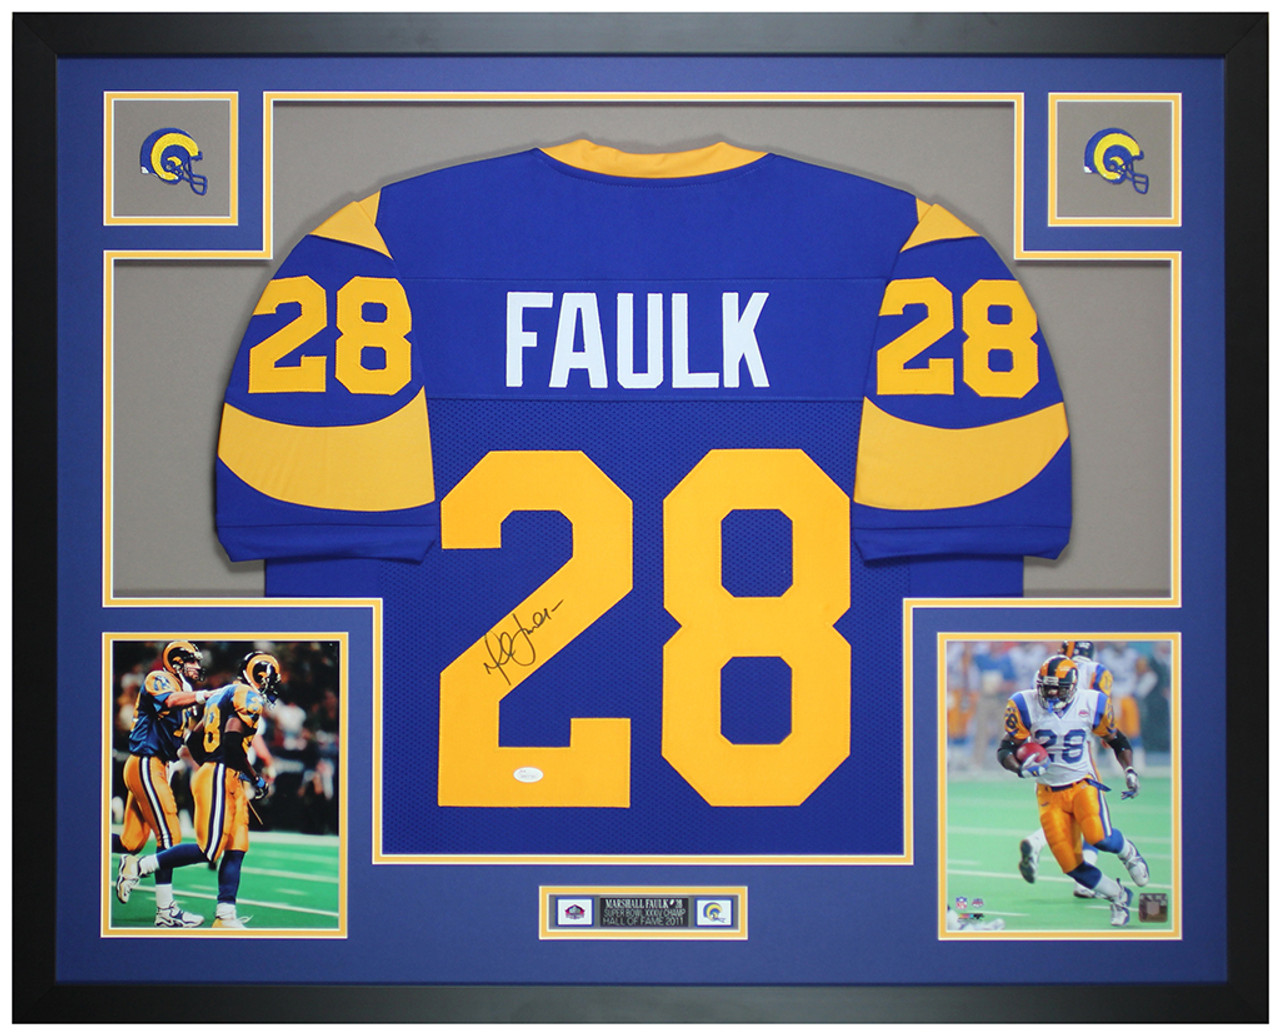 Kurt Warner Autographed and Framed St. Louis Rams Jersey